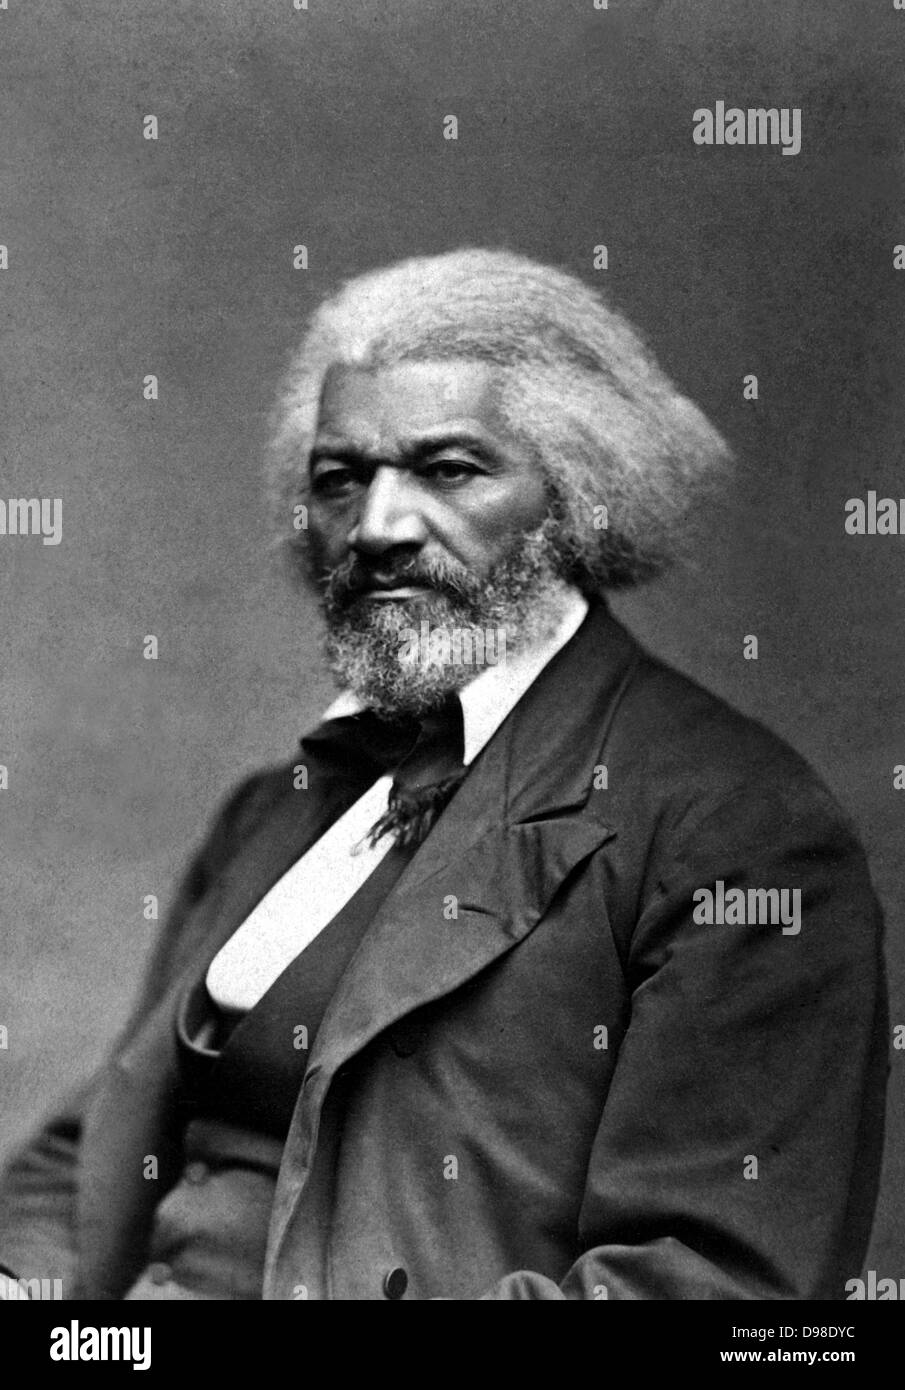 Frederick Douglass (c1818-1895,born Frederick Augustus Washing Bailey, a slave), c1879. African American abolitionist, reformer, champion of women's suffrage and believer in the equality of all citizens of the United States. Stock Photo